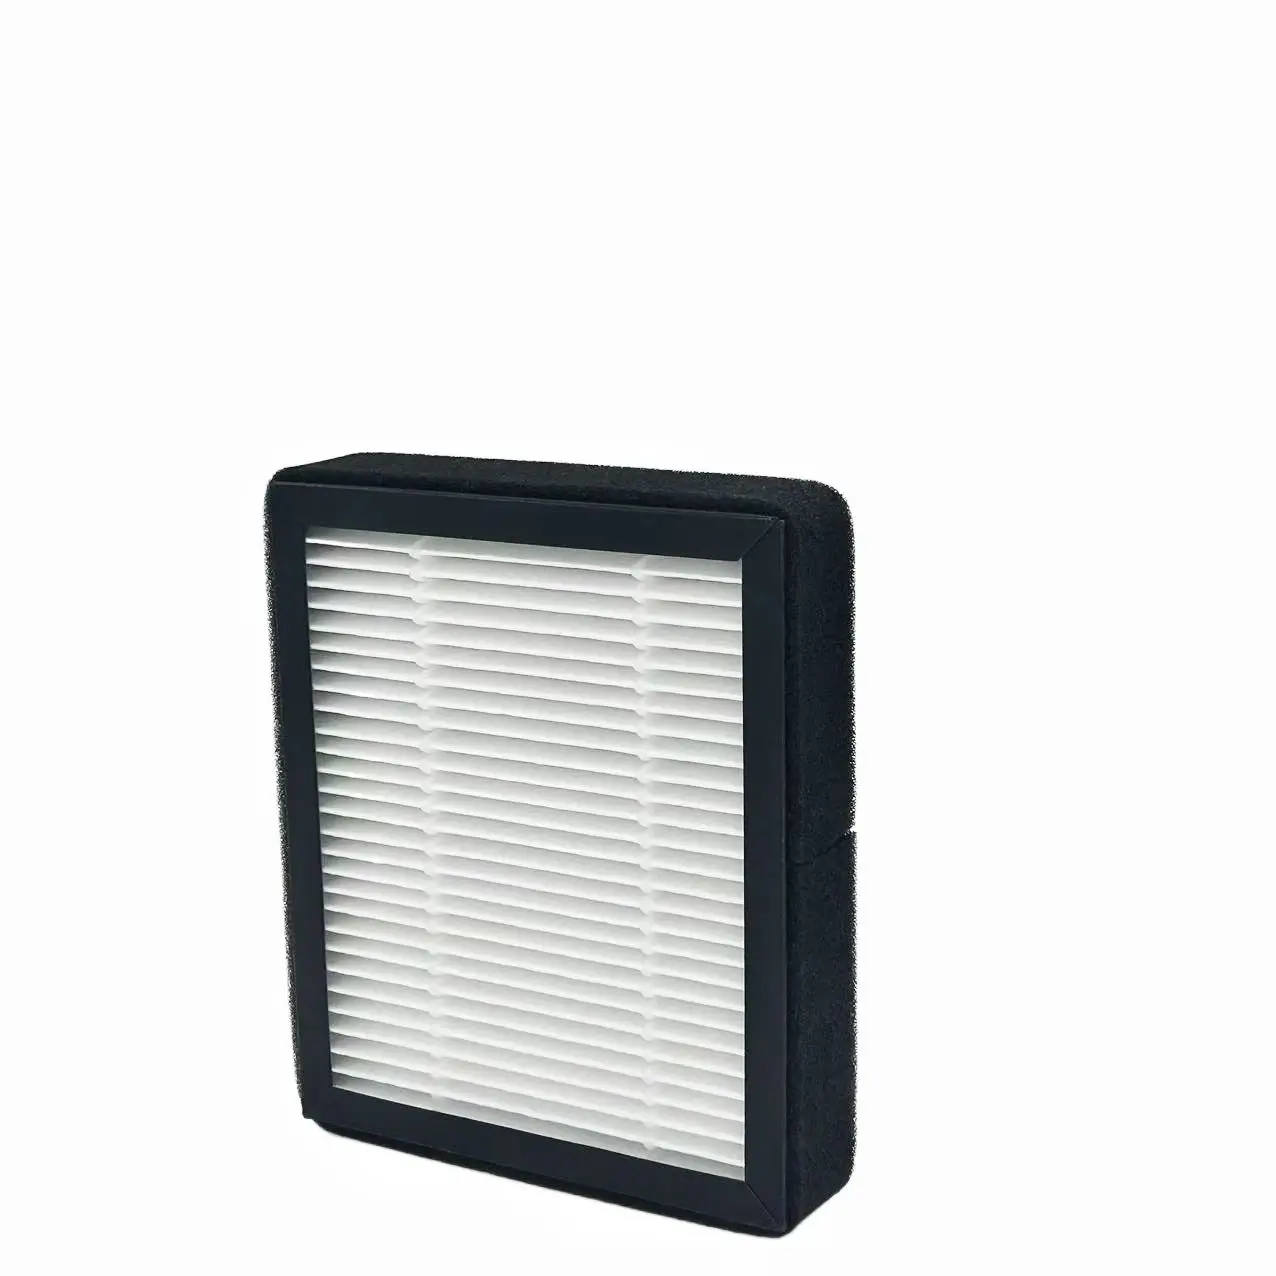 Exclusive Air filter For purafide XP120 (4Pcs/2 Set) H13  replacement h11 h12 h13 activated carbon filter